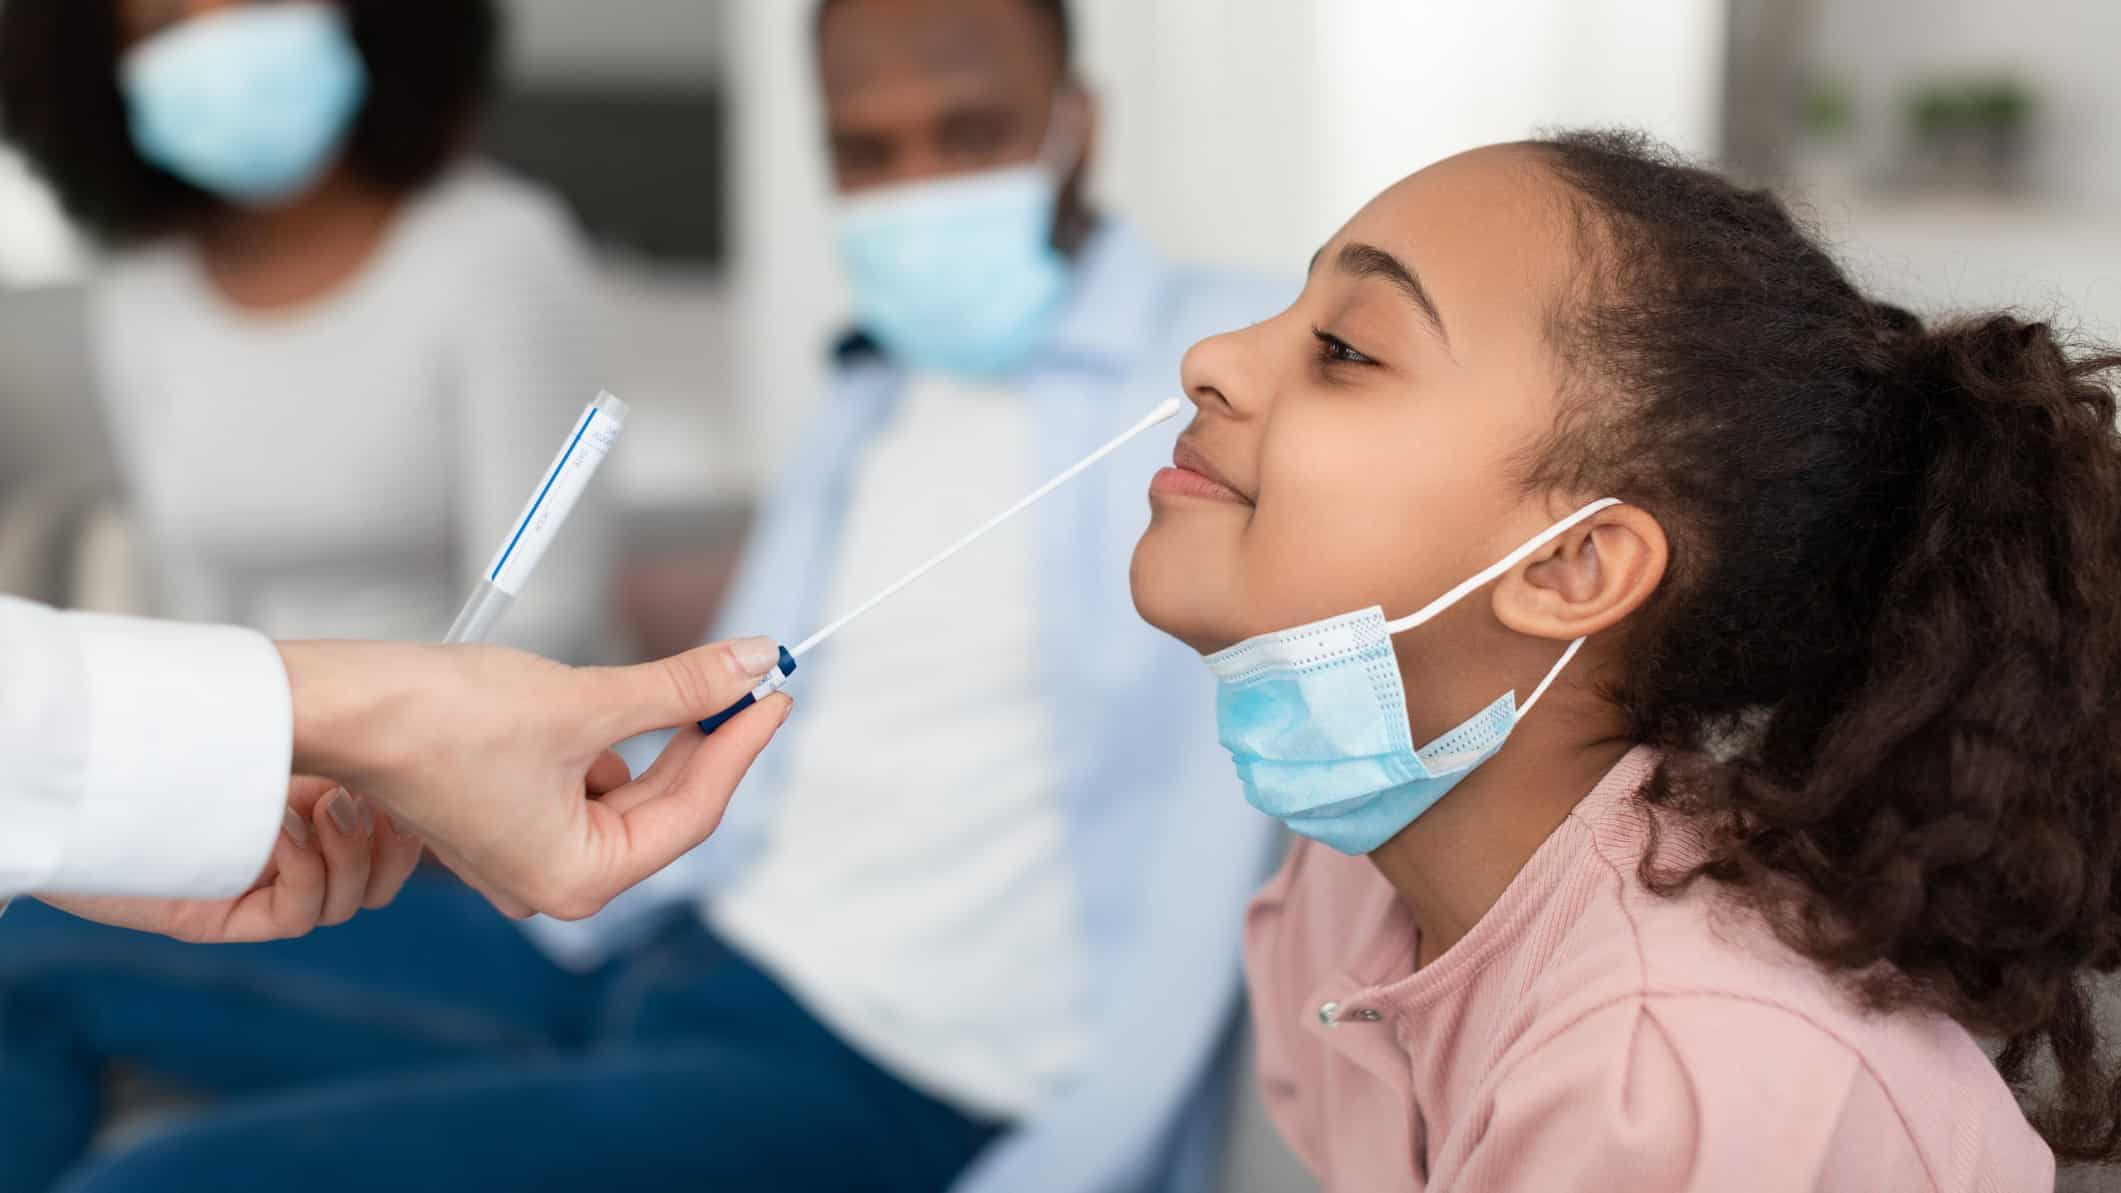 a young girl smiles as she is about to get a nasal swab test from a medical practitioner while her masked parent looks on in the background.